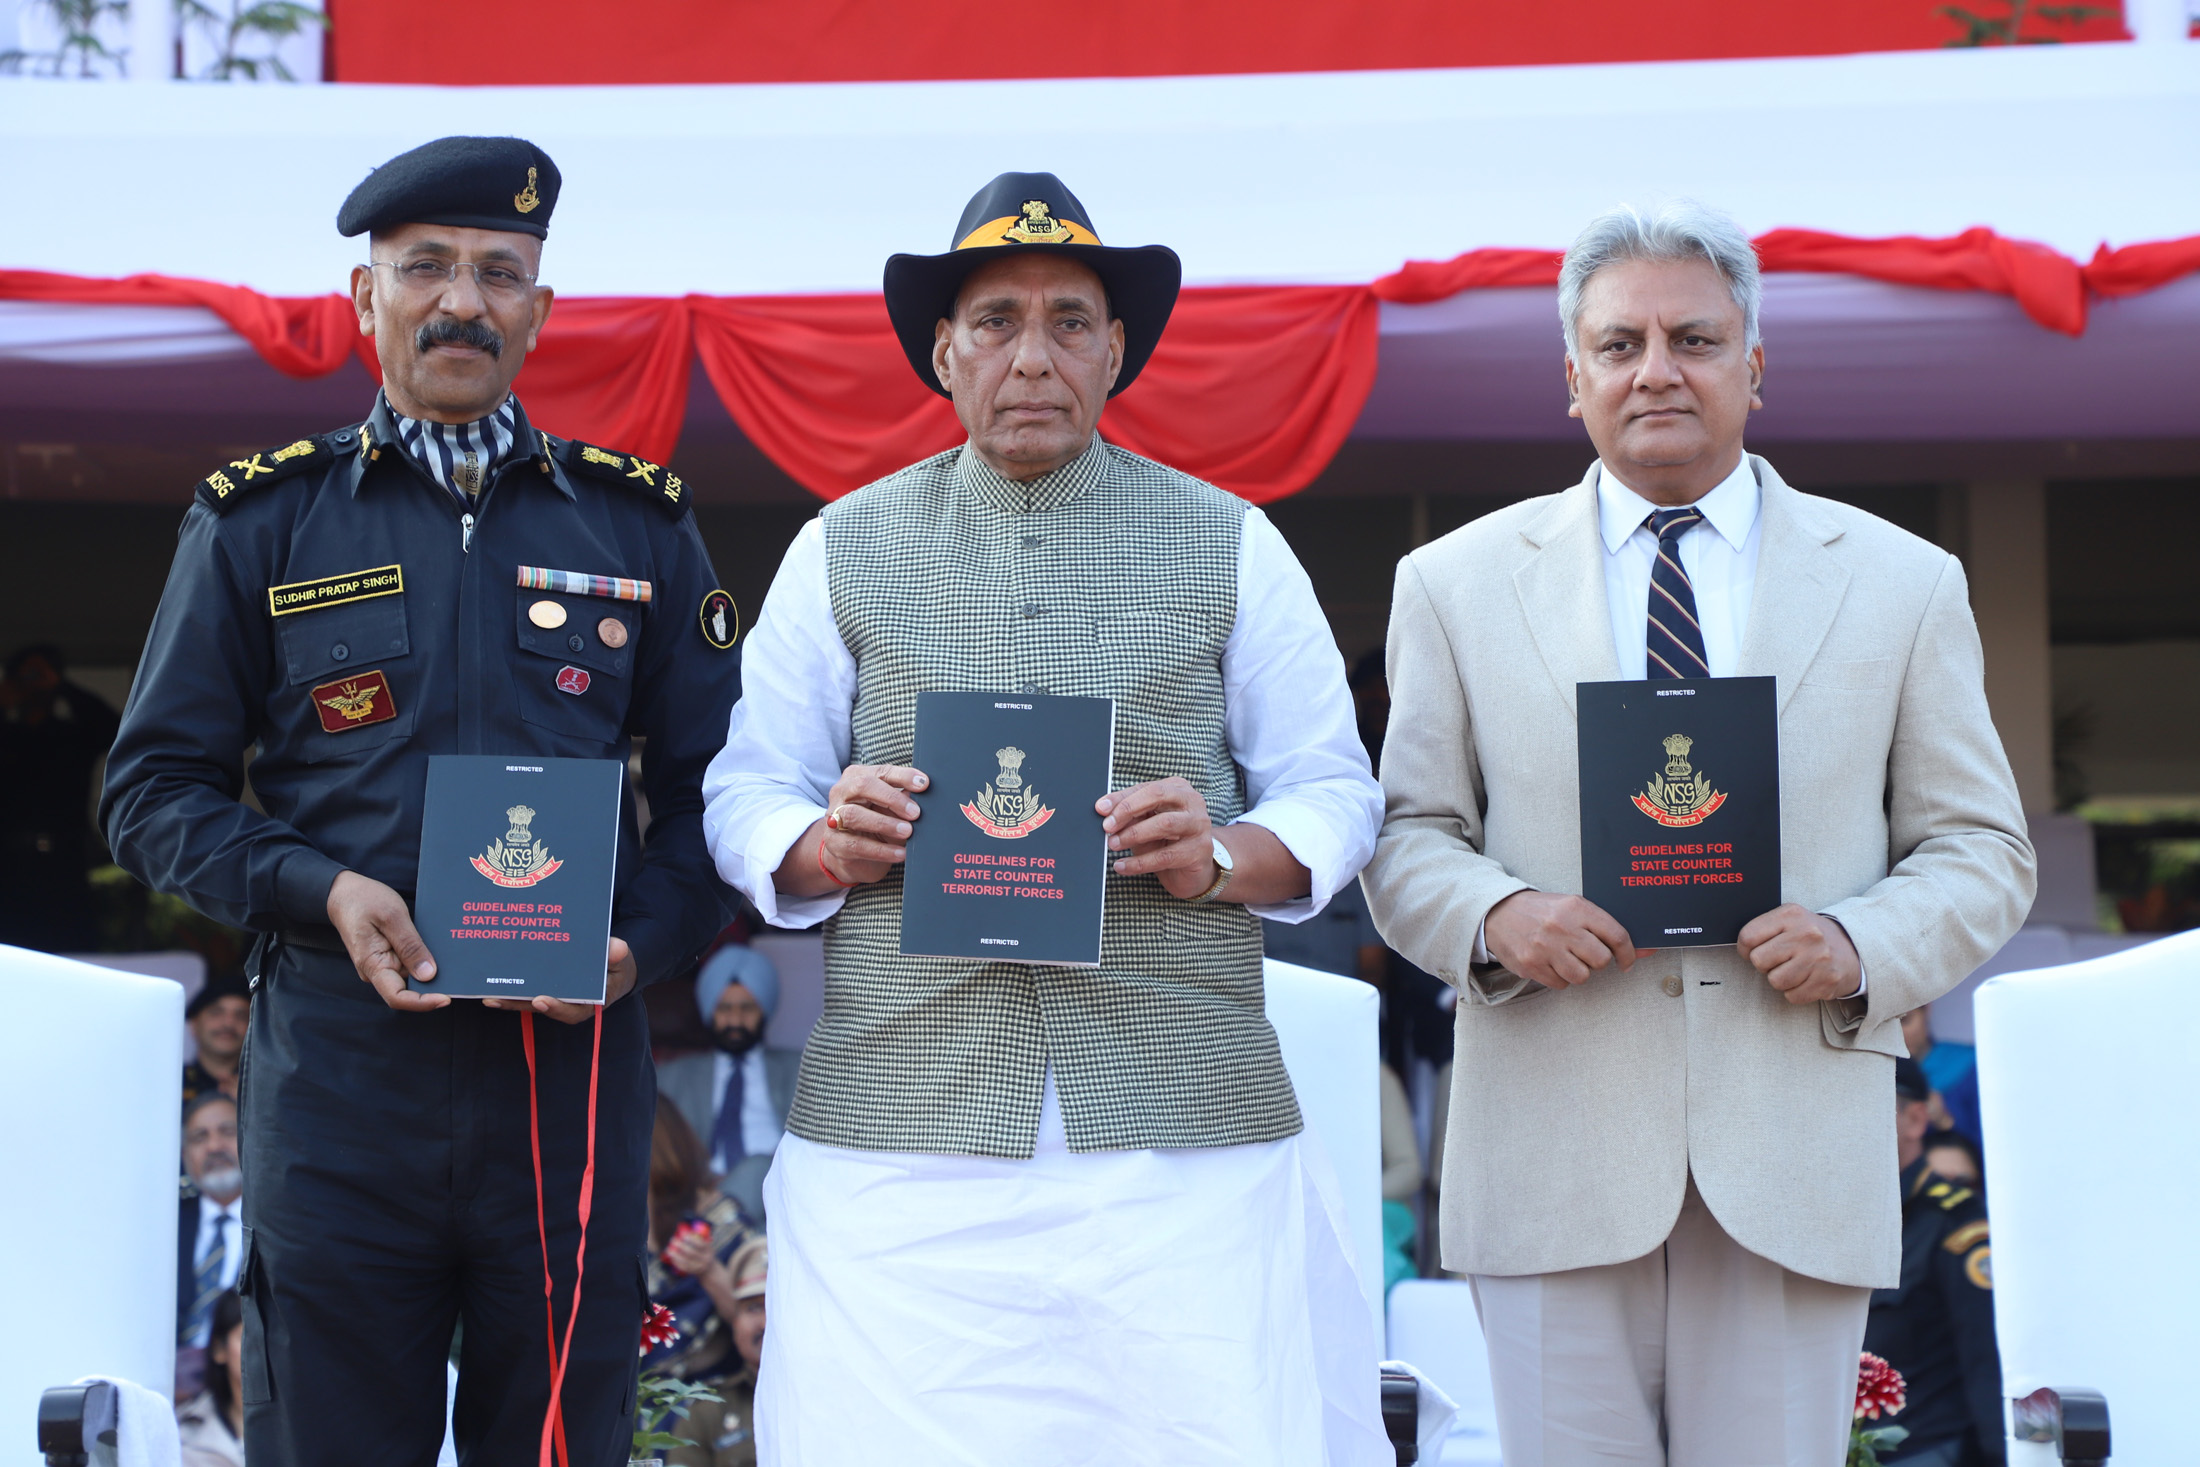 The Union Home Minister, Shri Rajnath Singh releasing a compendium, during the Closing Ceremony of the 8th All India Police Commando Competition, at Manesar, Gurugram, in Haryana on January 20, 2018.  The Director General, NSG, Shri Sudhir Pratap Singh and the Director, IB, Shri Rajiv Jain are also seen.